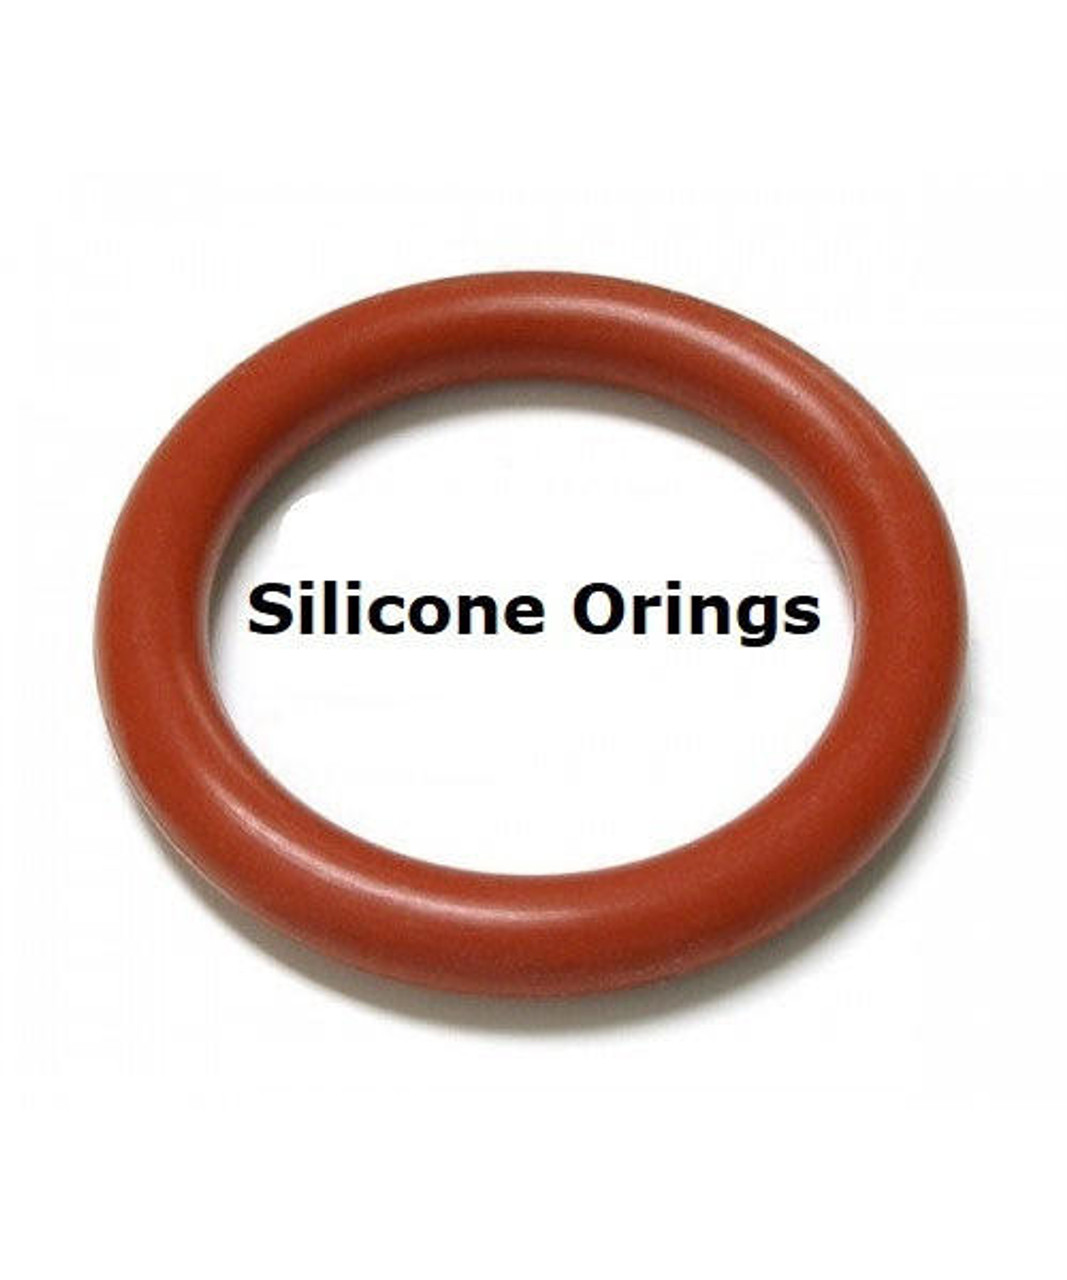 Silicone O-rings Size 380 Price for 1 pc